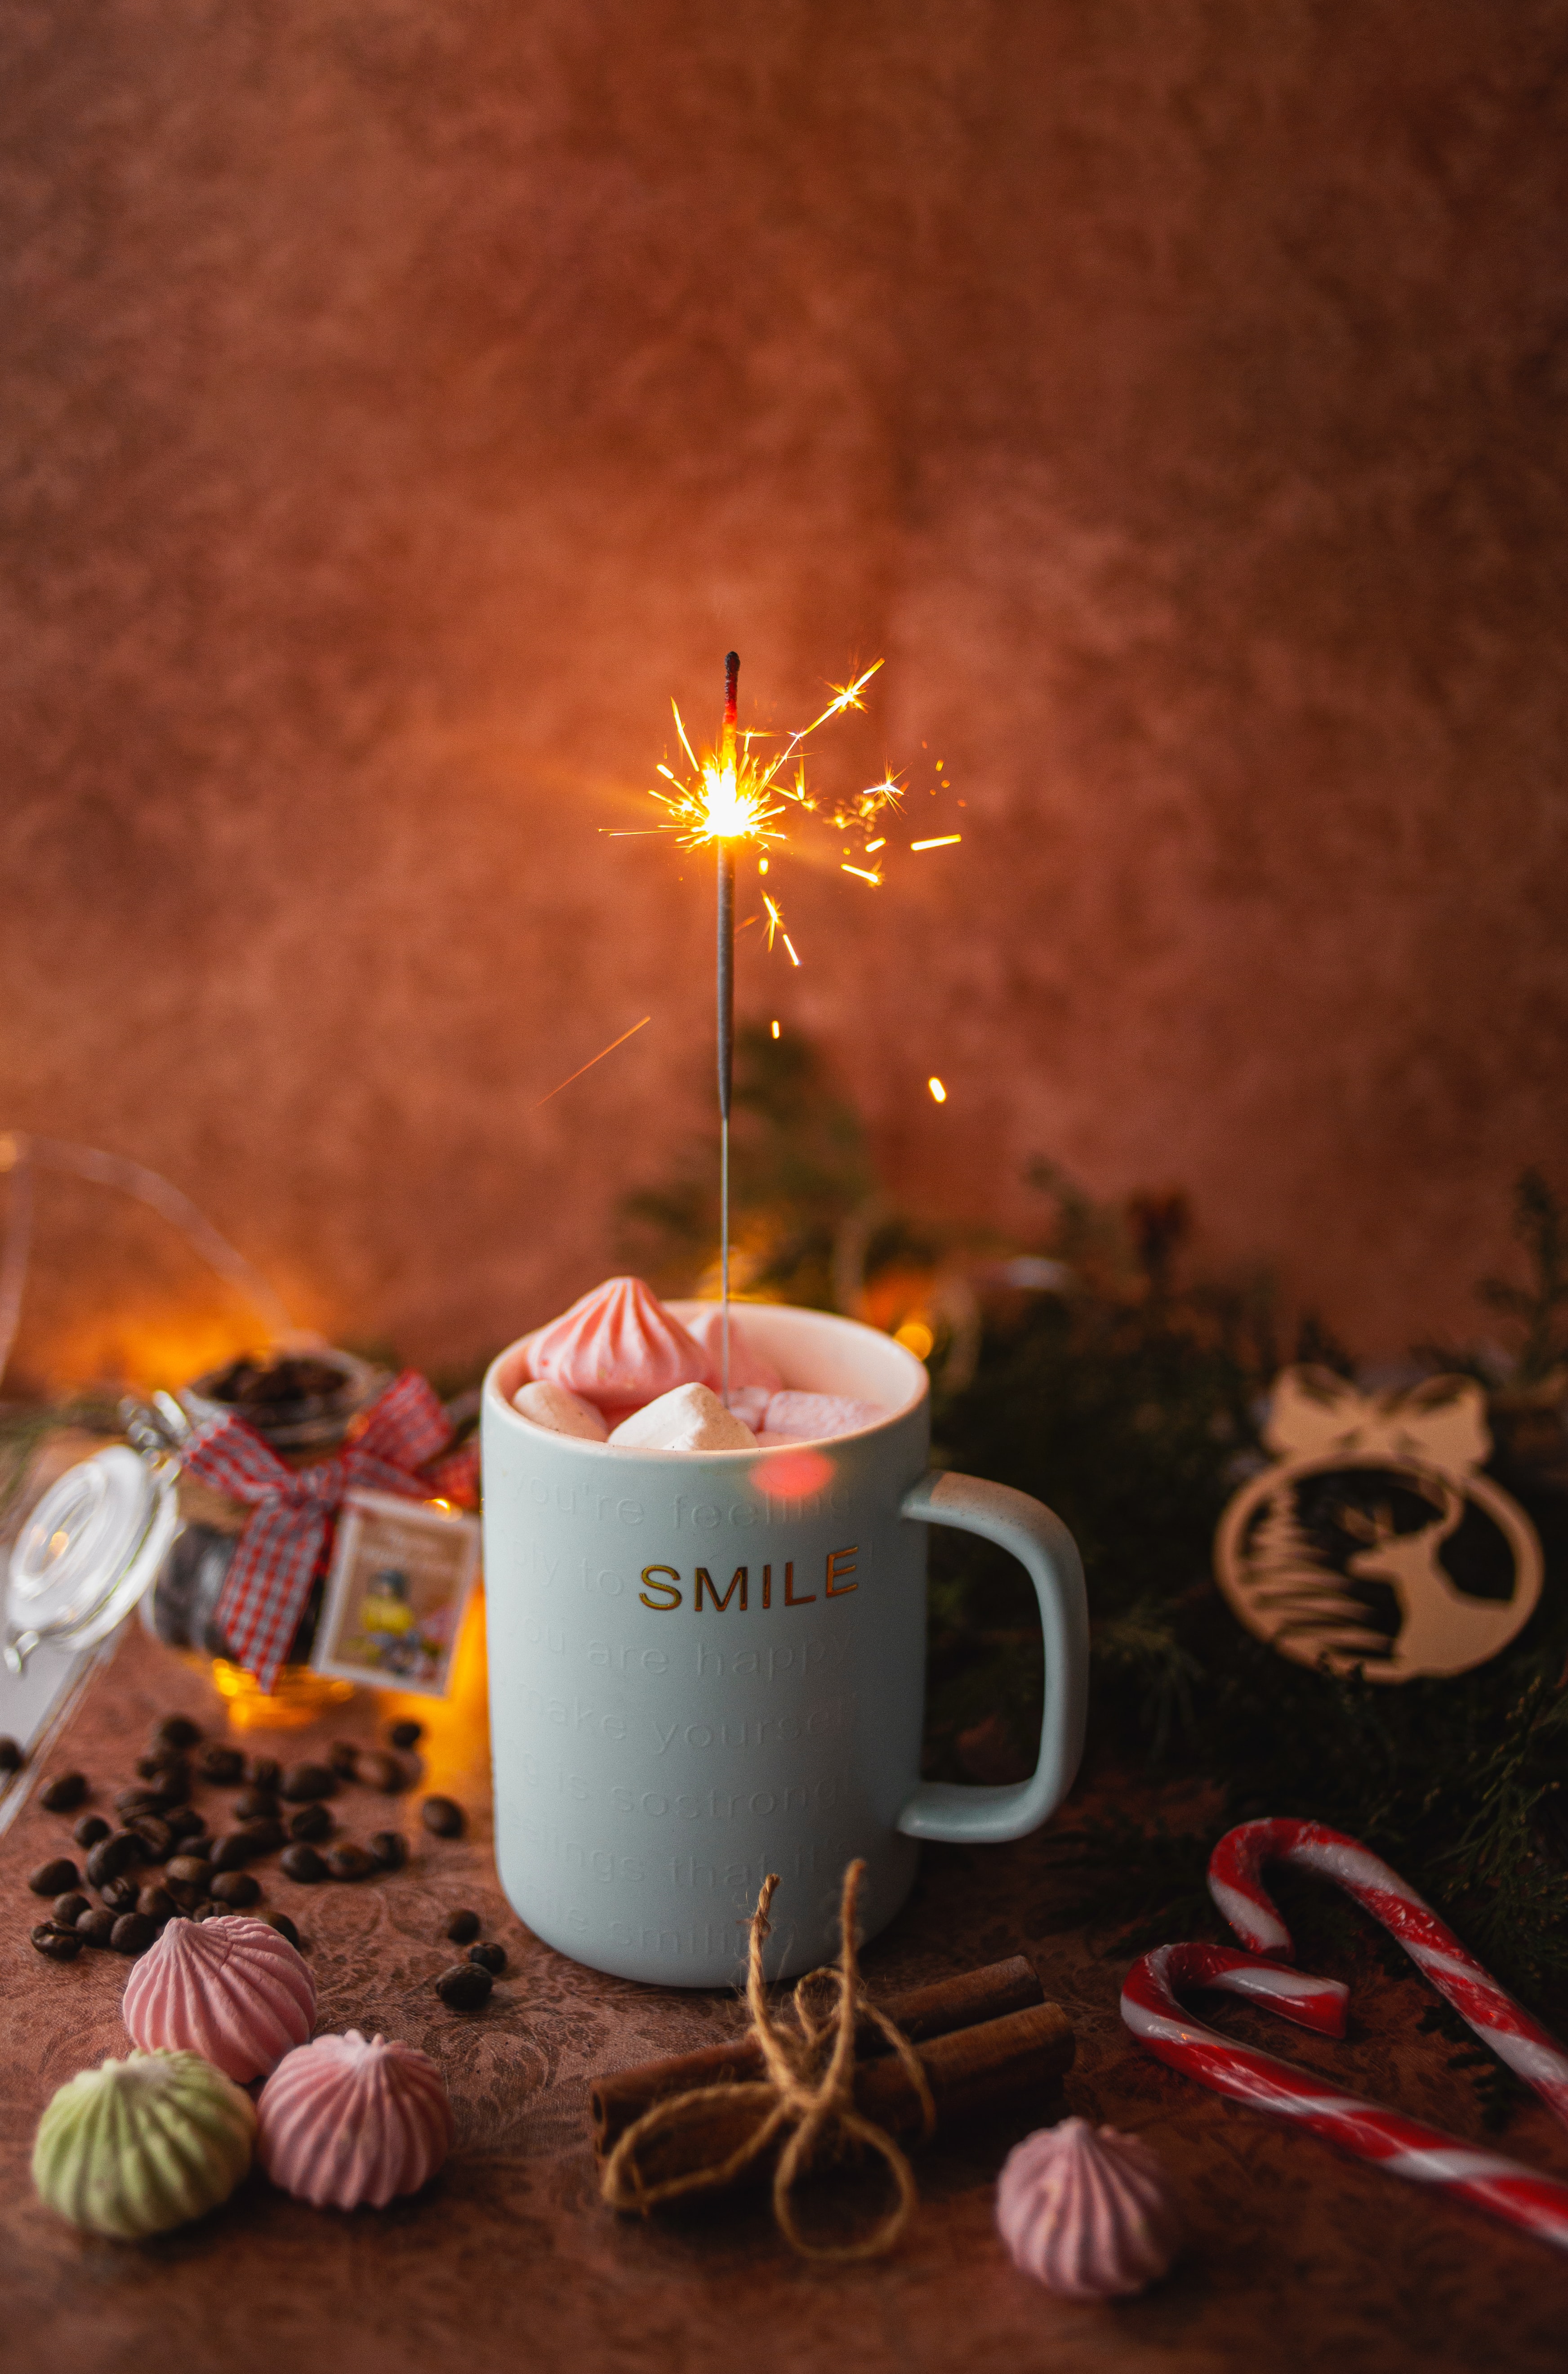 miscellanea, mug, holiday, sparks, cup, miscellaneous, marshmallow, bengal lights, sparklers, zephyr Full HD